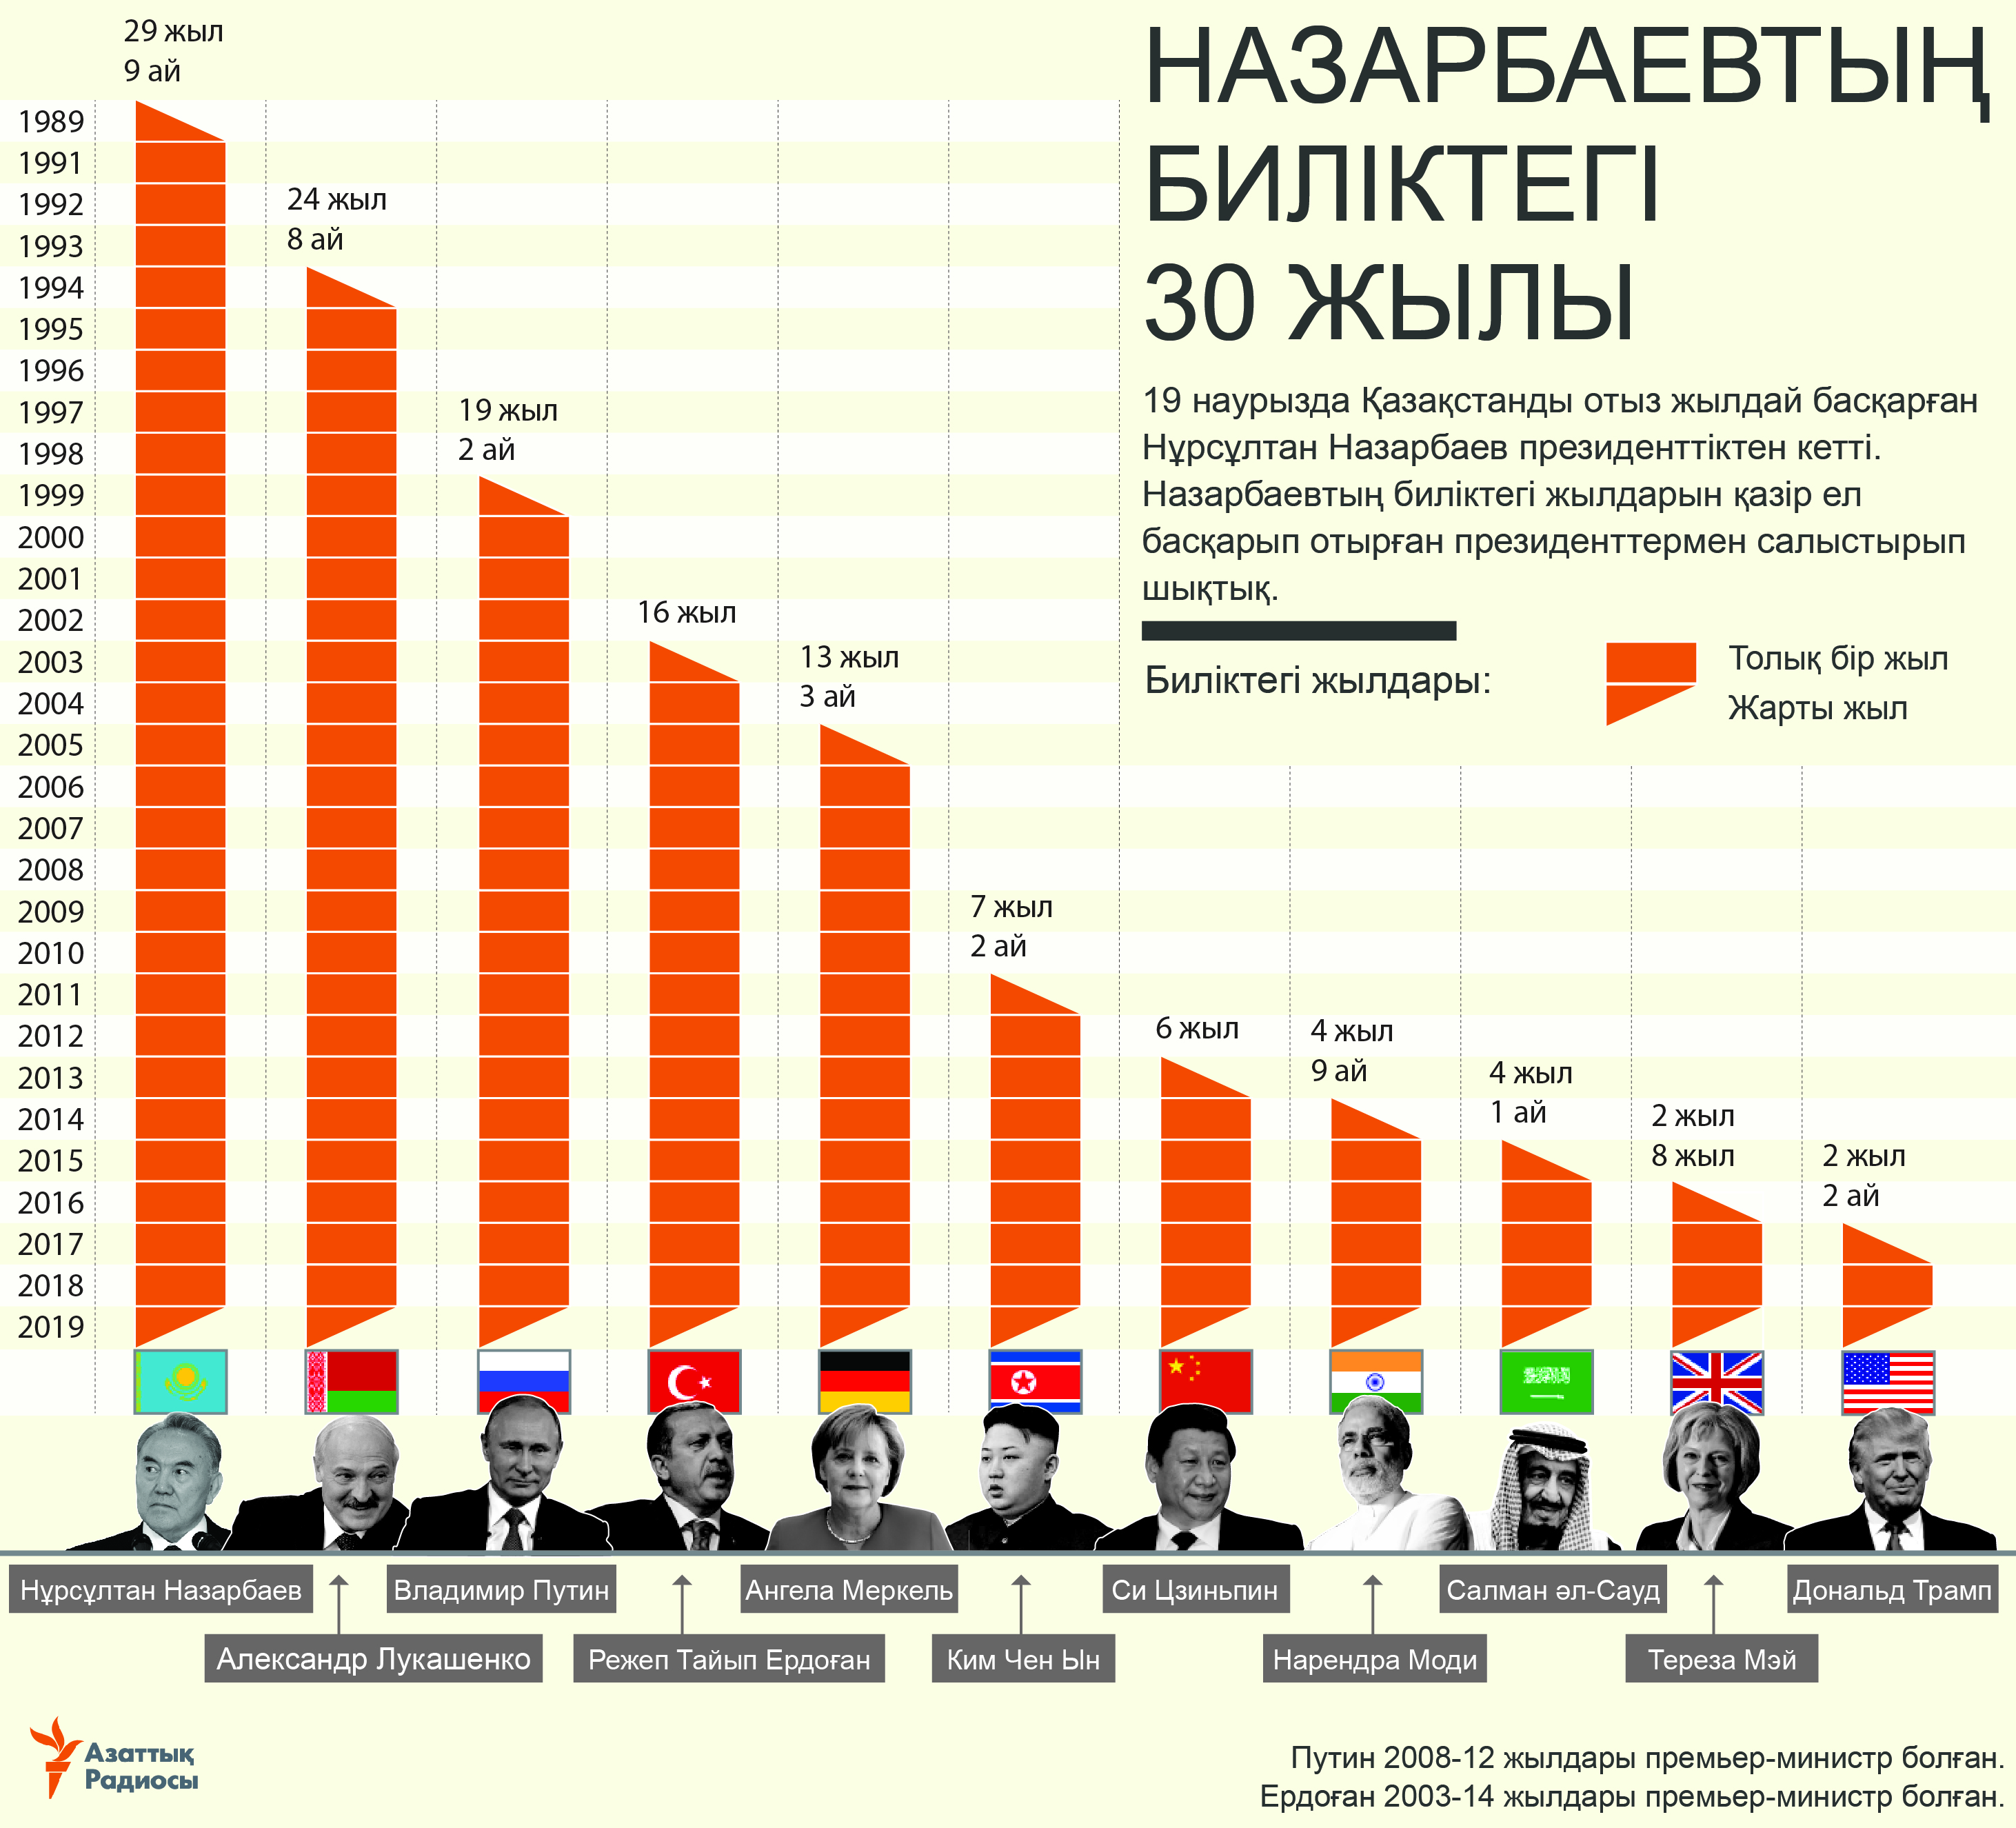 infographic about 30 years